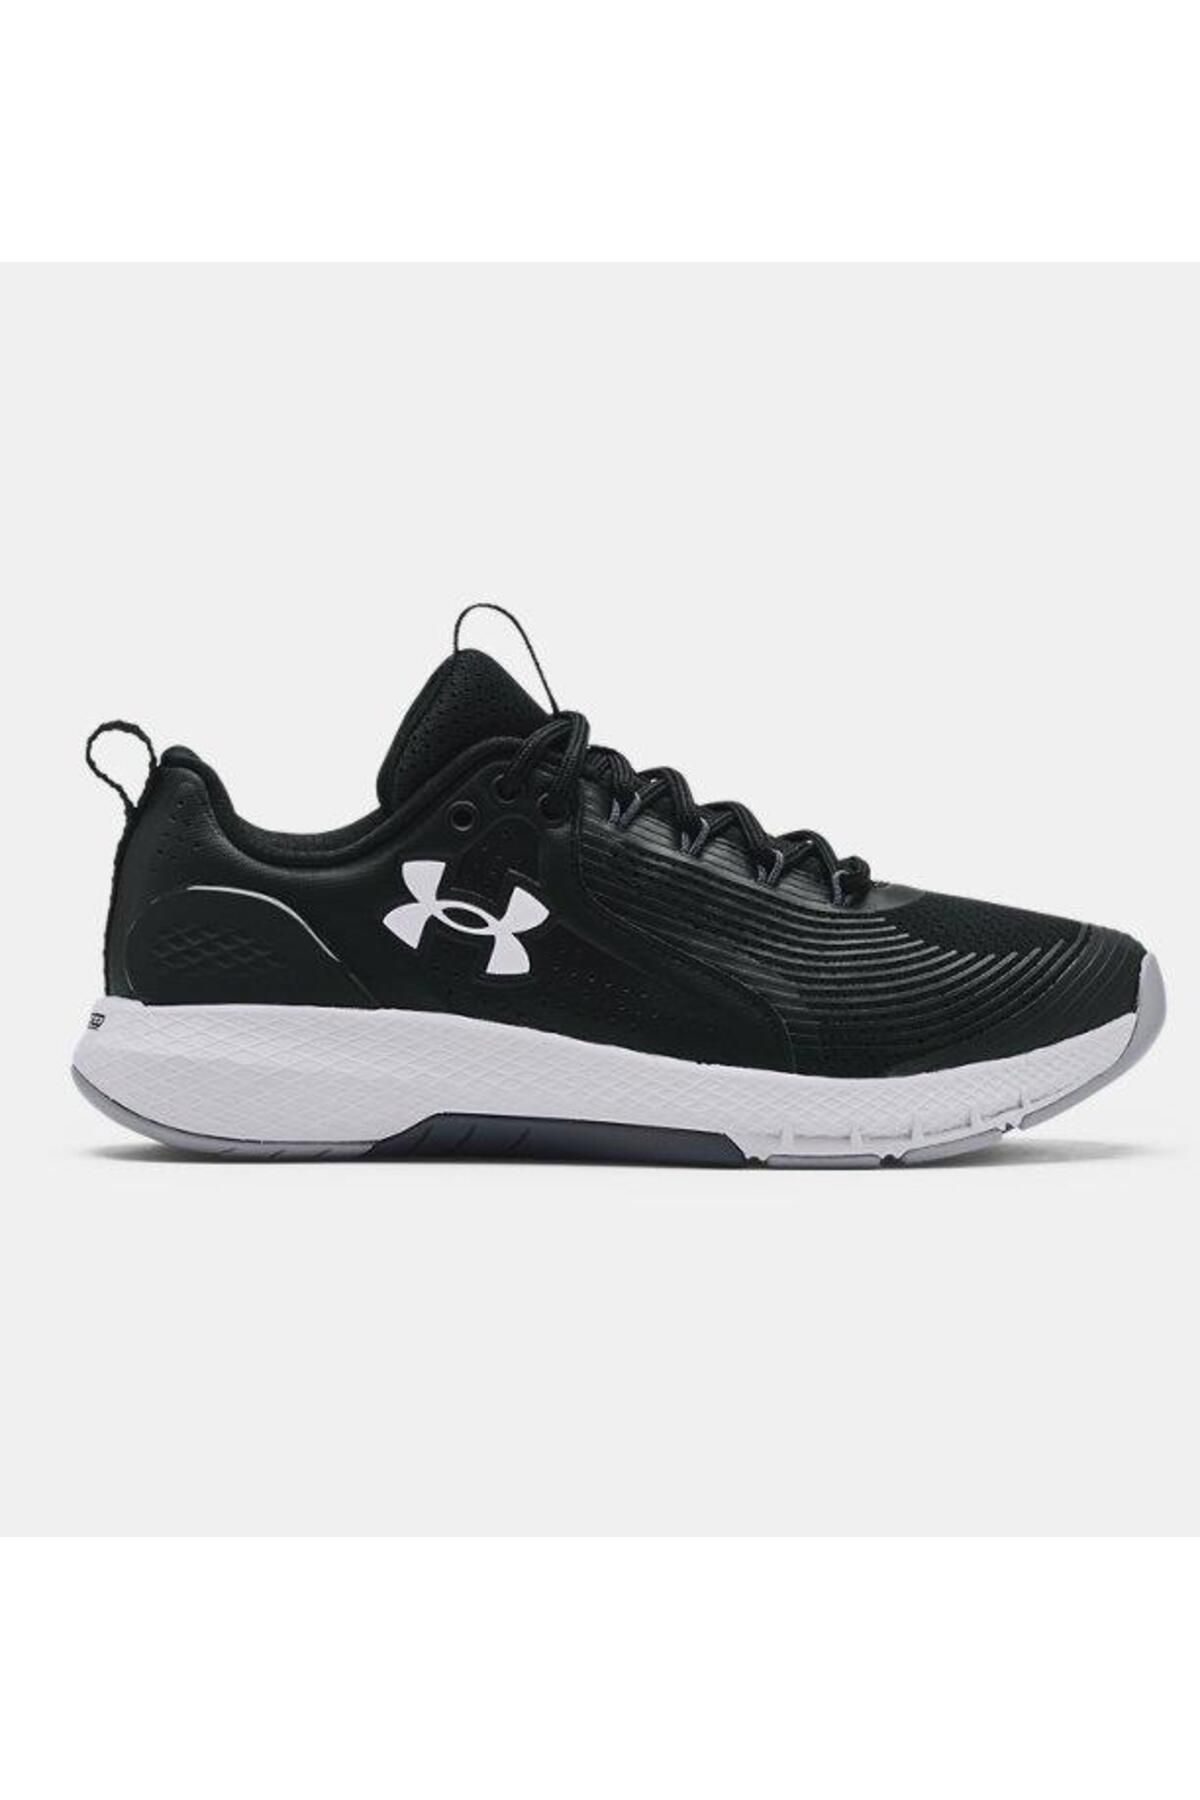 Under Armour UA Charged Commit TR 3 Black